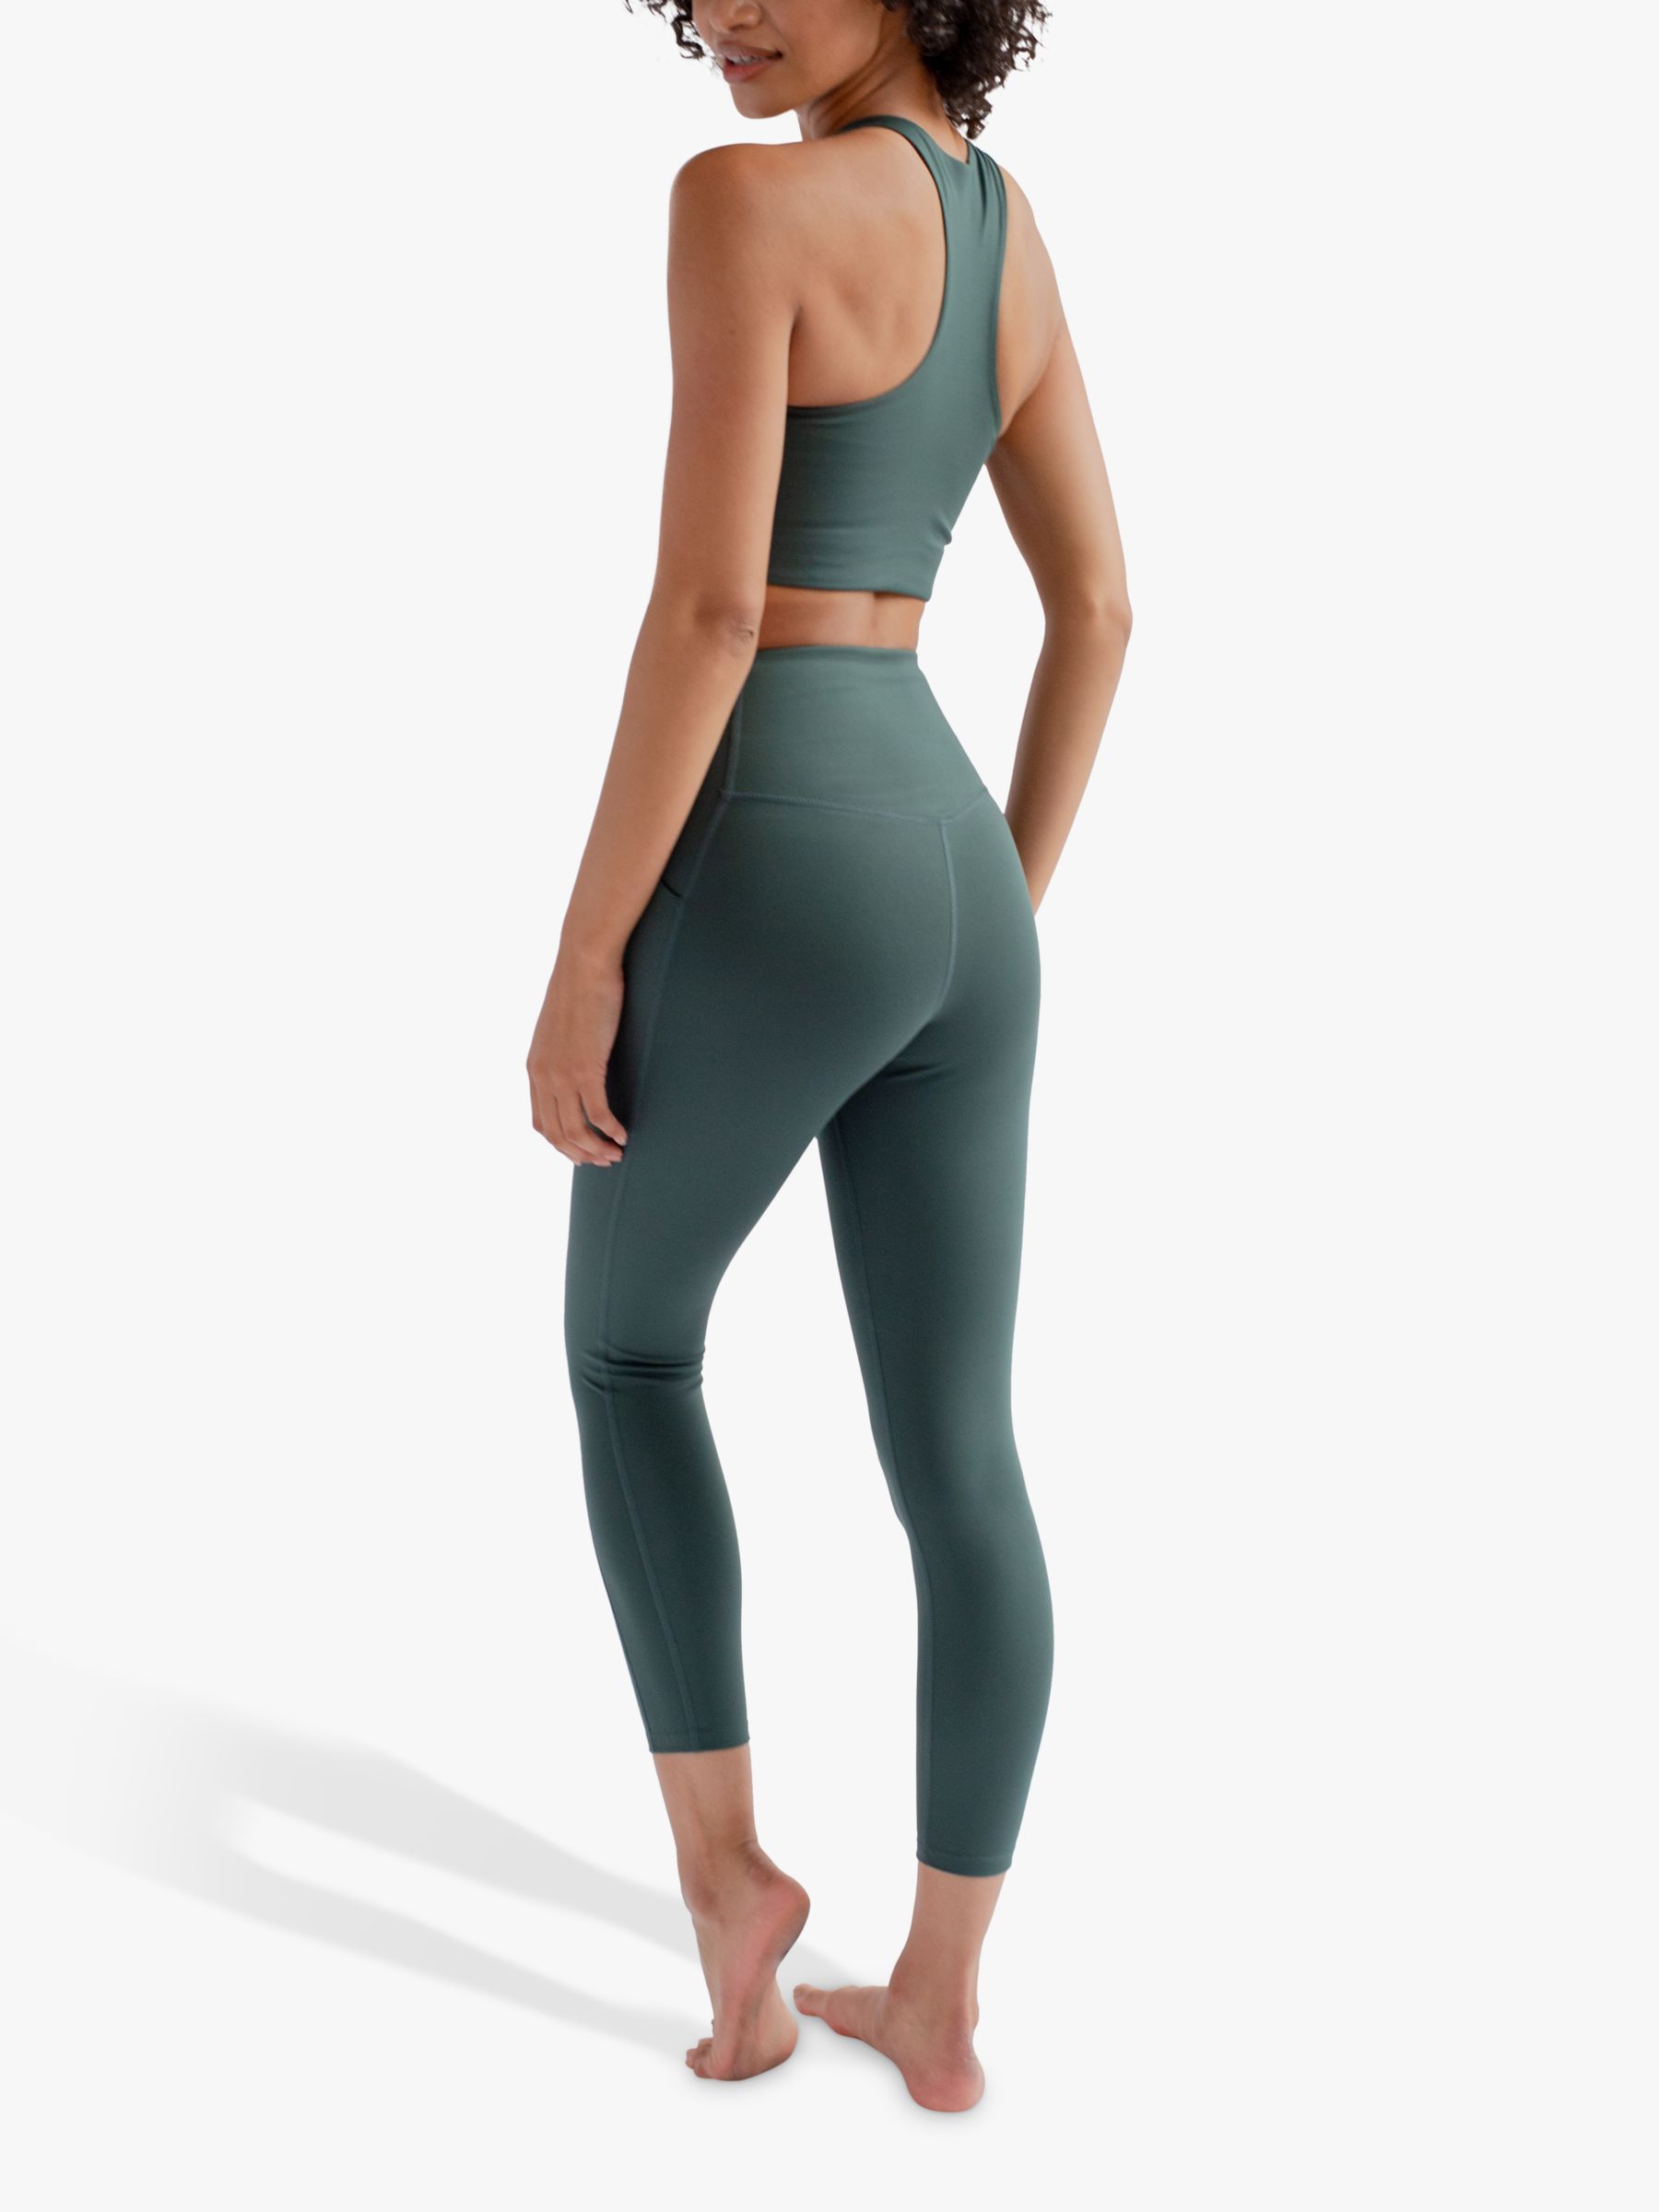 Buy Girlfriend Collective Compressive High Rise 7/8 Leggings Online at johnlewis.com